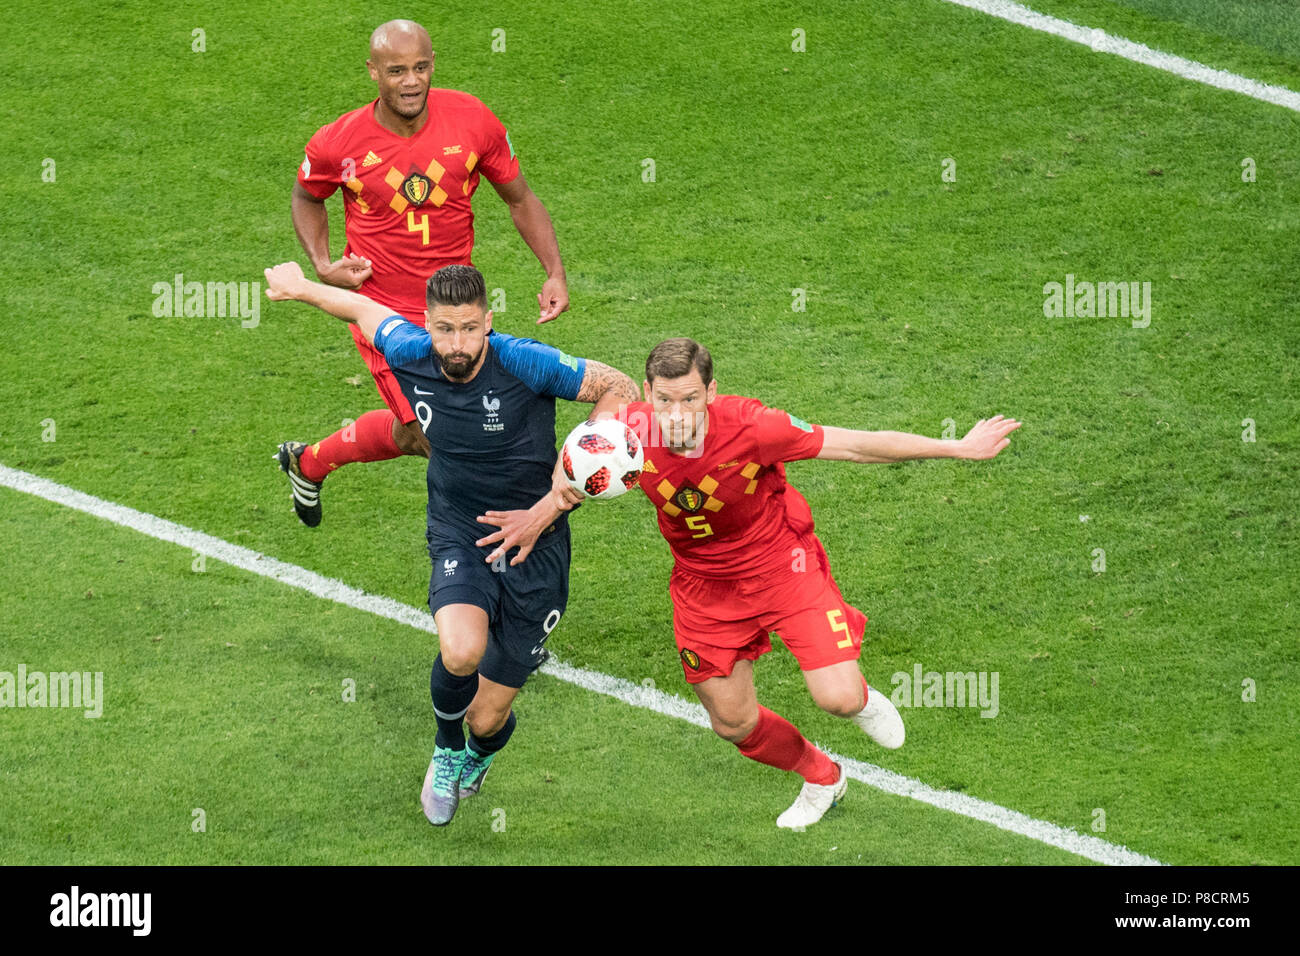 Olivier GIROUD (mi., FRA) versus Jan VERTONGHEN (right, BEL) and Vincent KOMPANY (BEL), action, fight for the ball, France (FRA) - Belgium (BEL) 1: 0, semi-finals, match 61, on 10.07.2018 in St.Petersburg; Football World Cup 2018 in Russia from 14.06. - 15.07.2018. © | usage worldwide Stock Photo